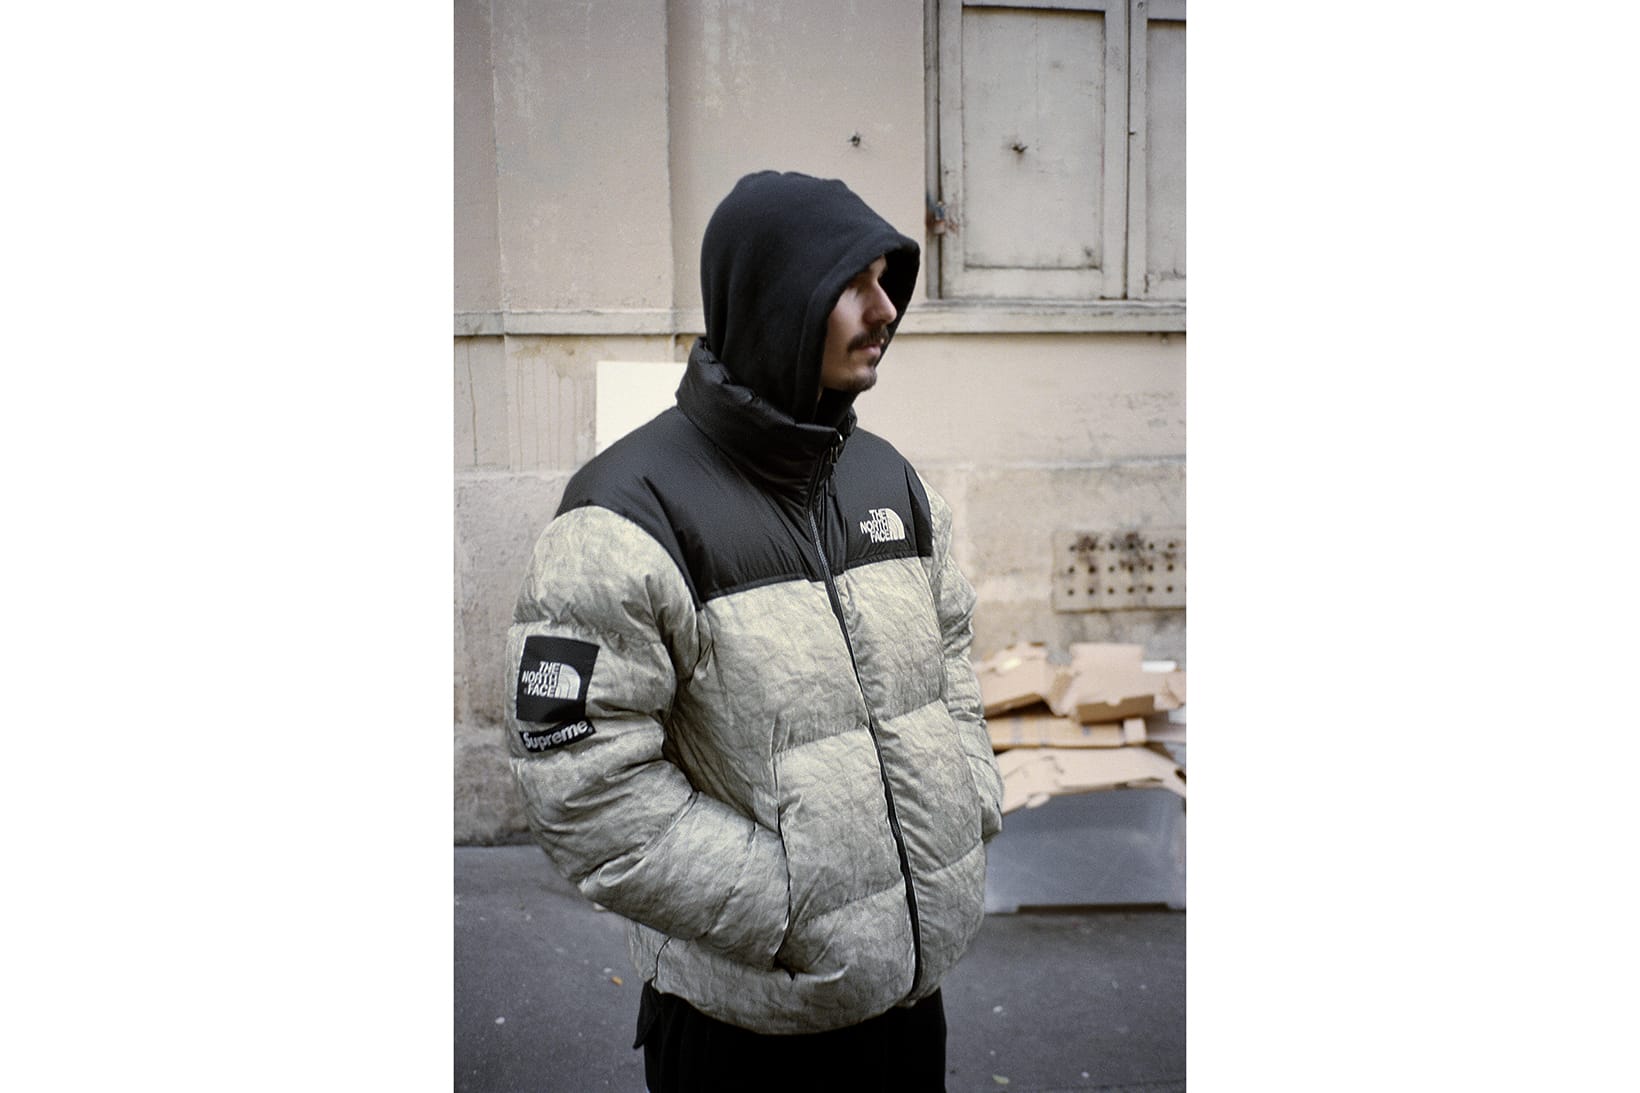 the north face jacket 2019